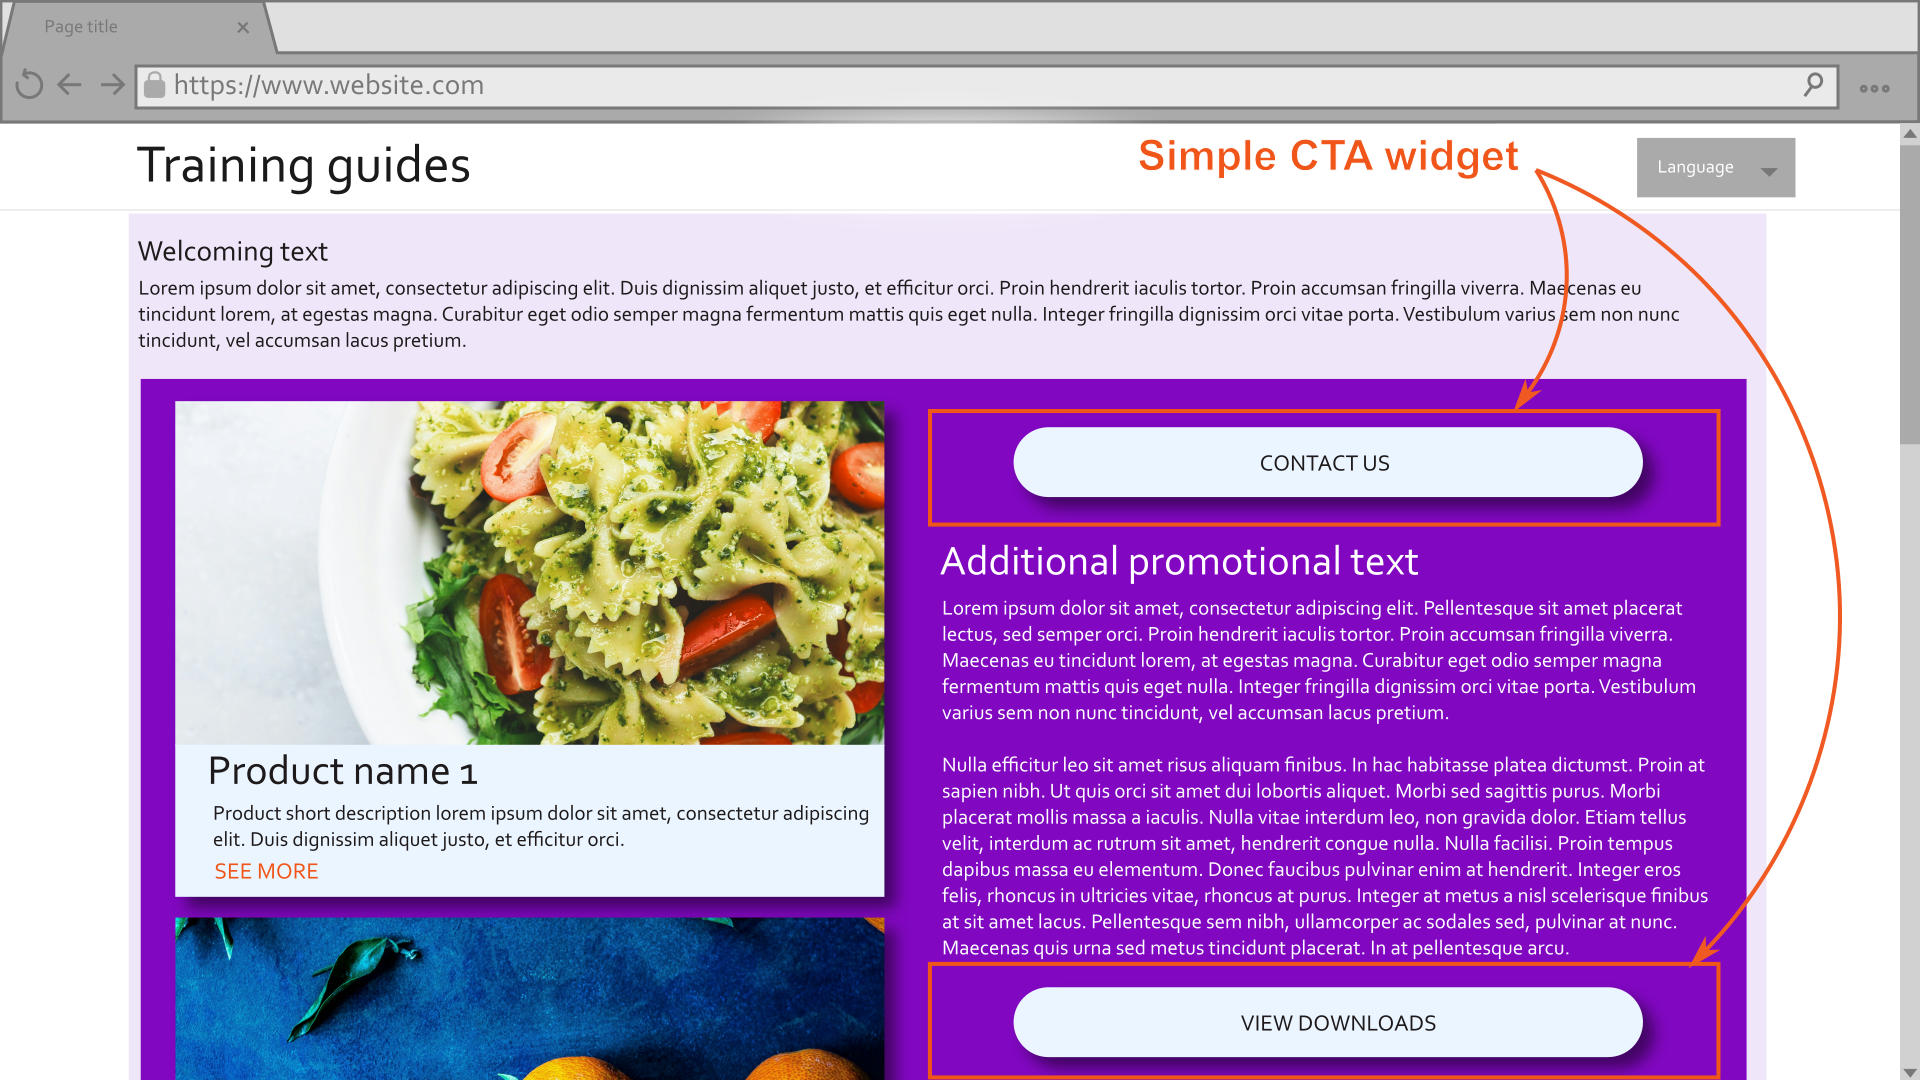 Mockup of a promotional page with Simple CTA widgets highlighted